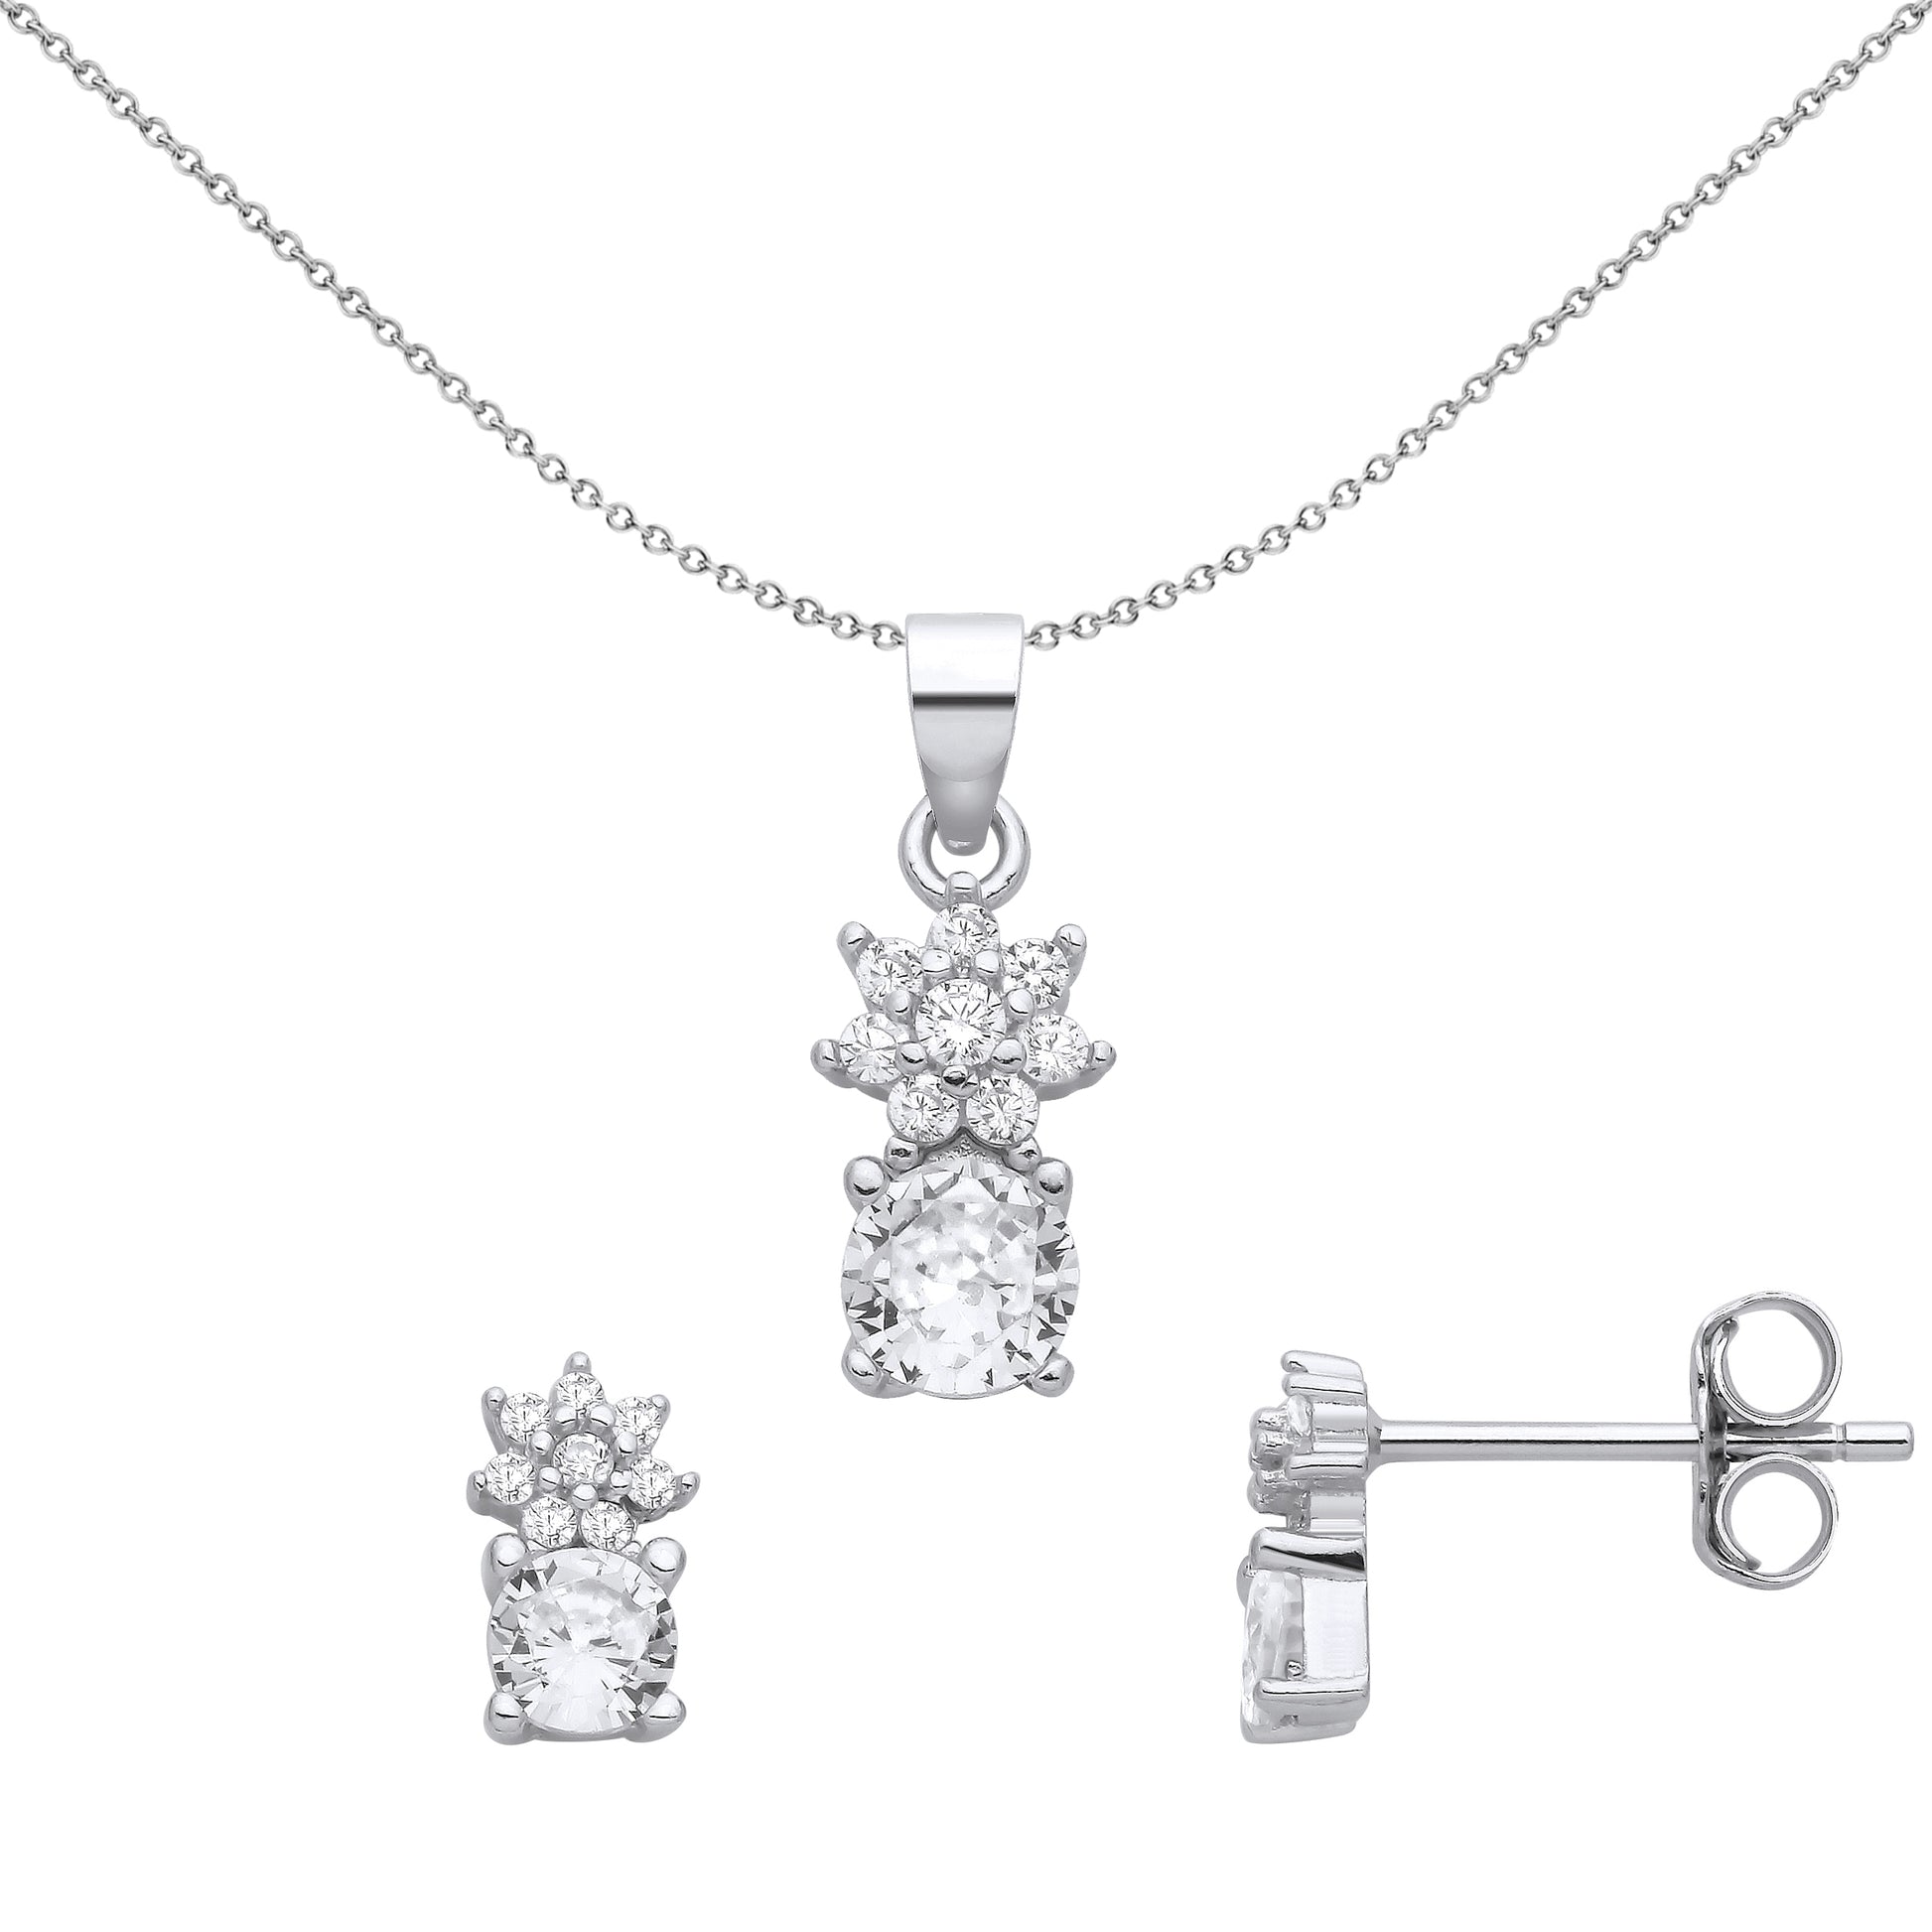 Silver  Pineapple Hat Cluster Solitaire Earrings Necklace Set - GSET673